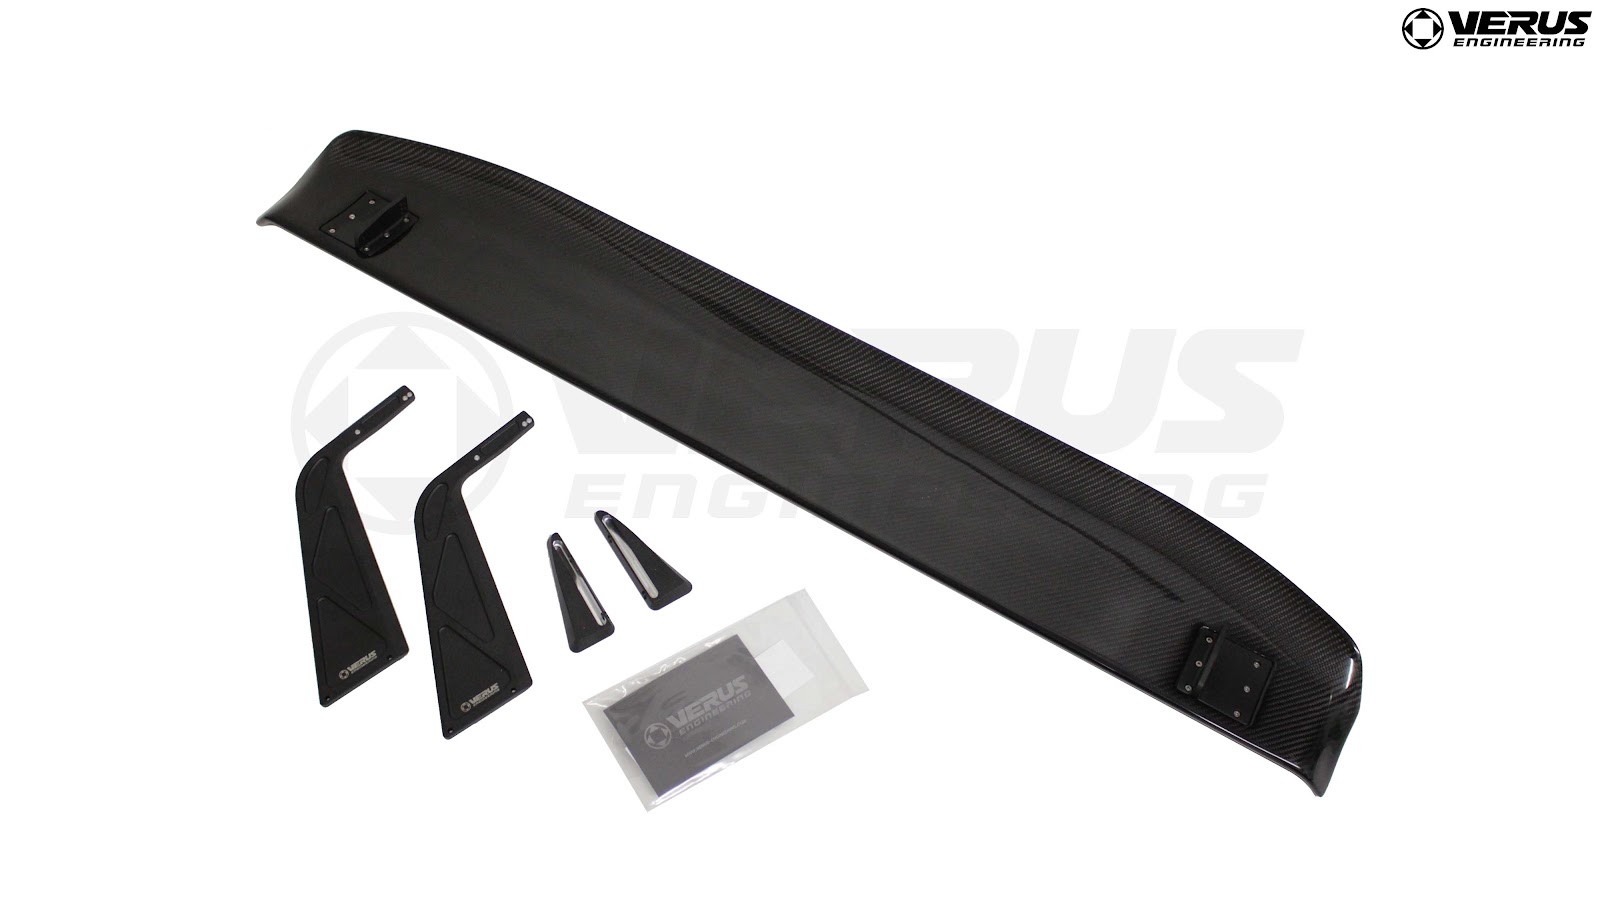 High-efficiency swan neck rear wing kit for a Mazda Miata ND